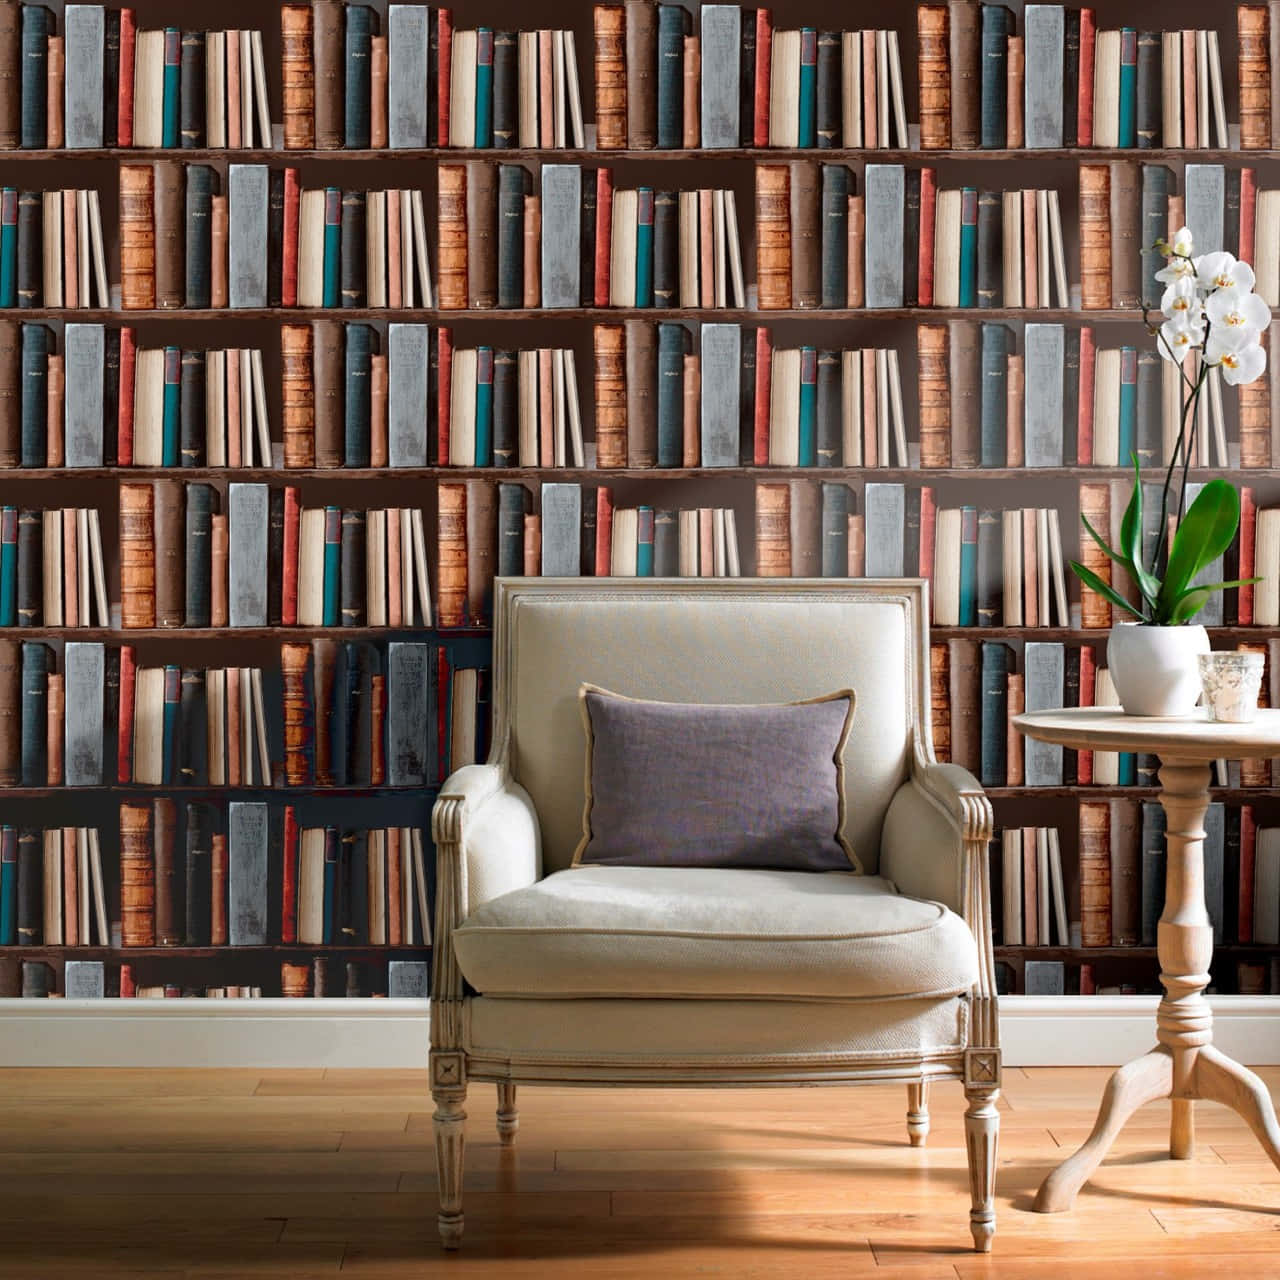 Patterned Bookshelf Picture